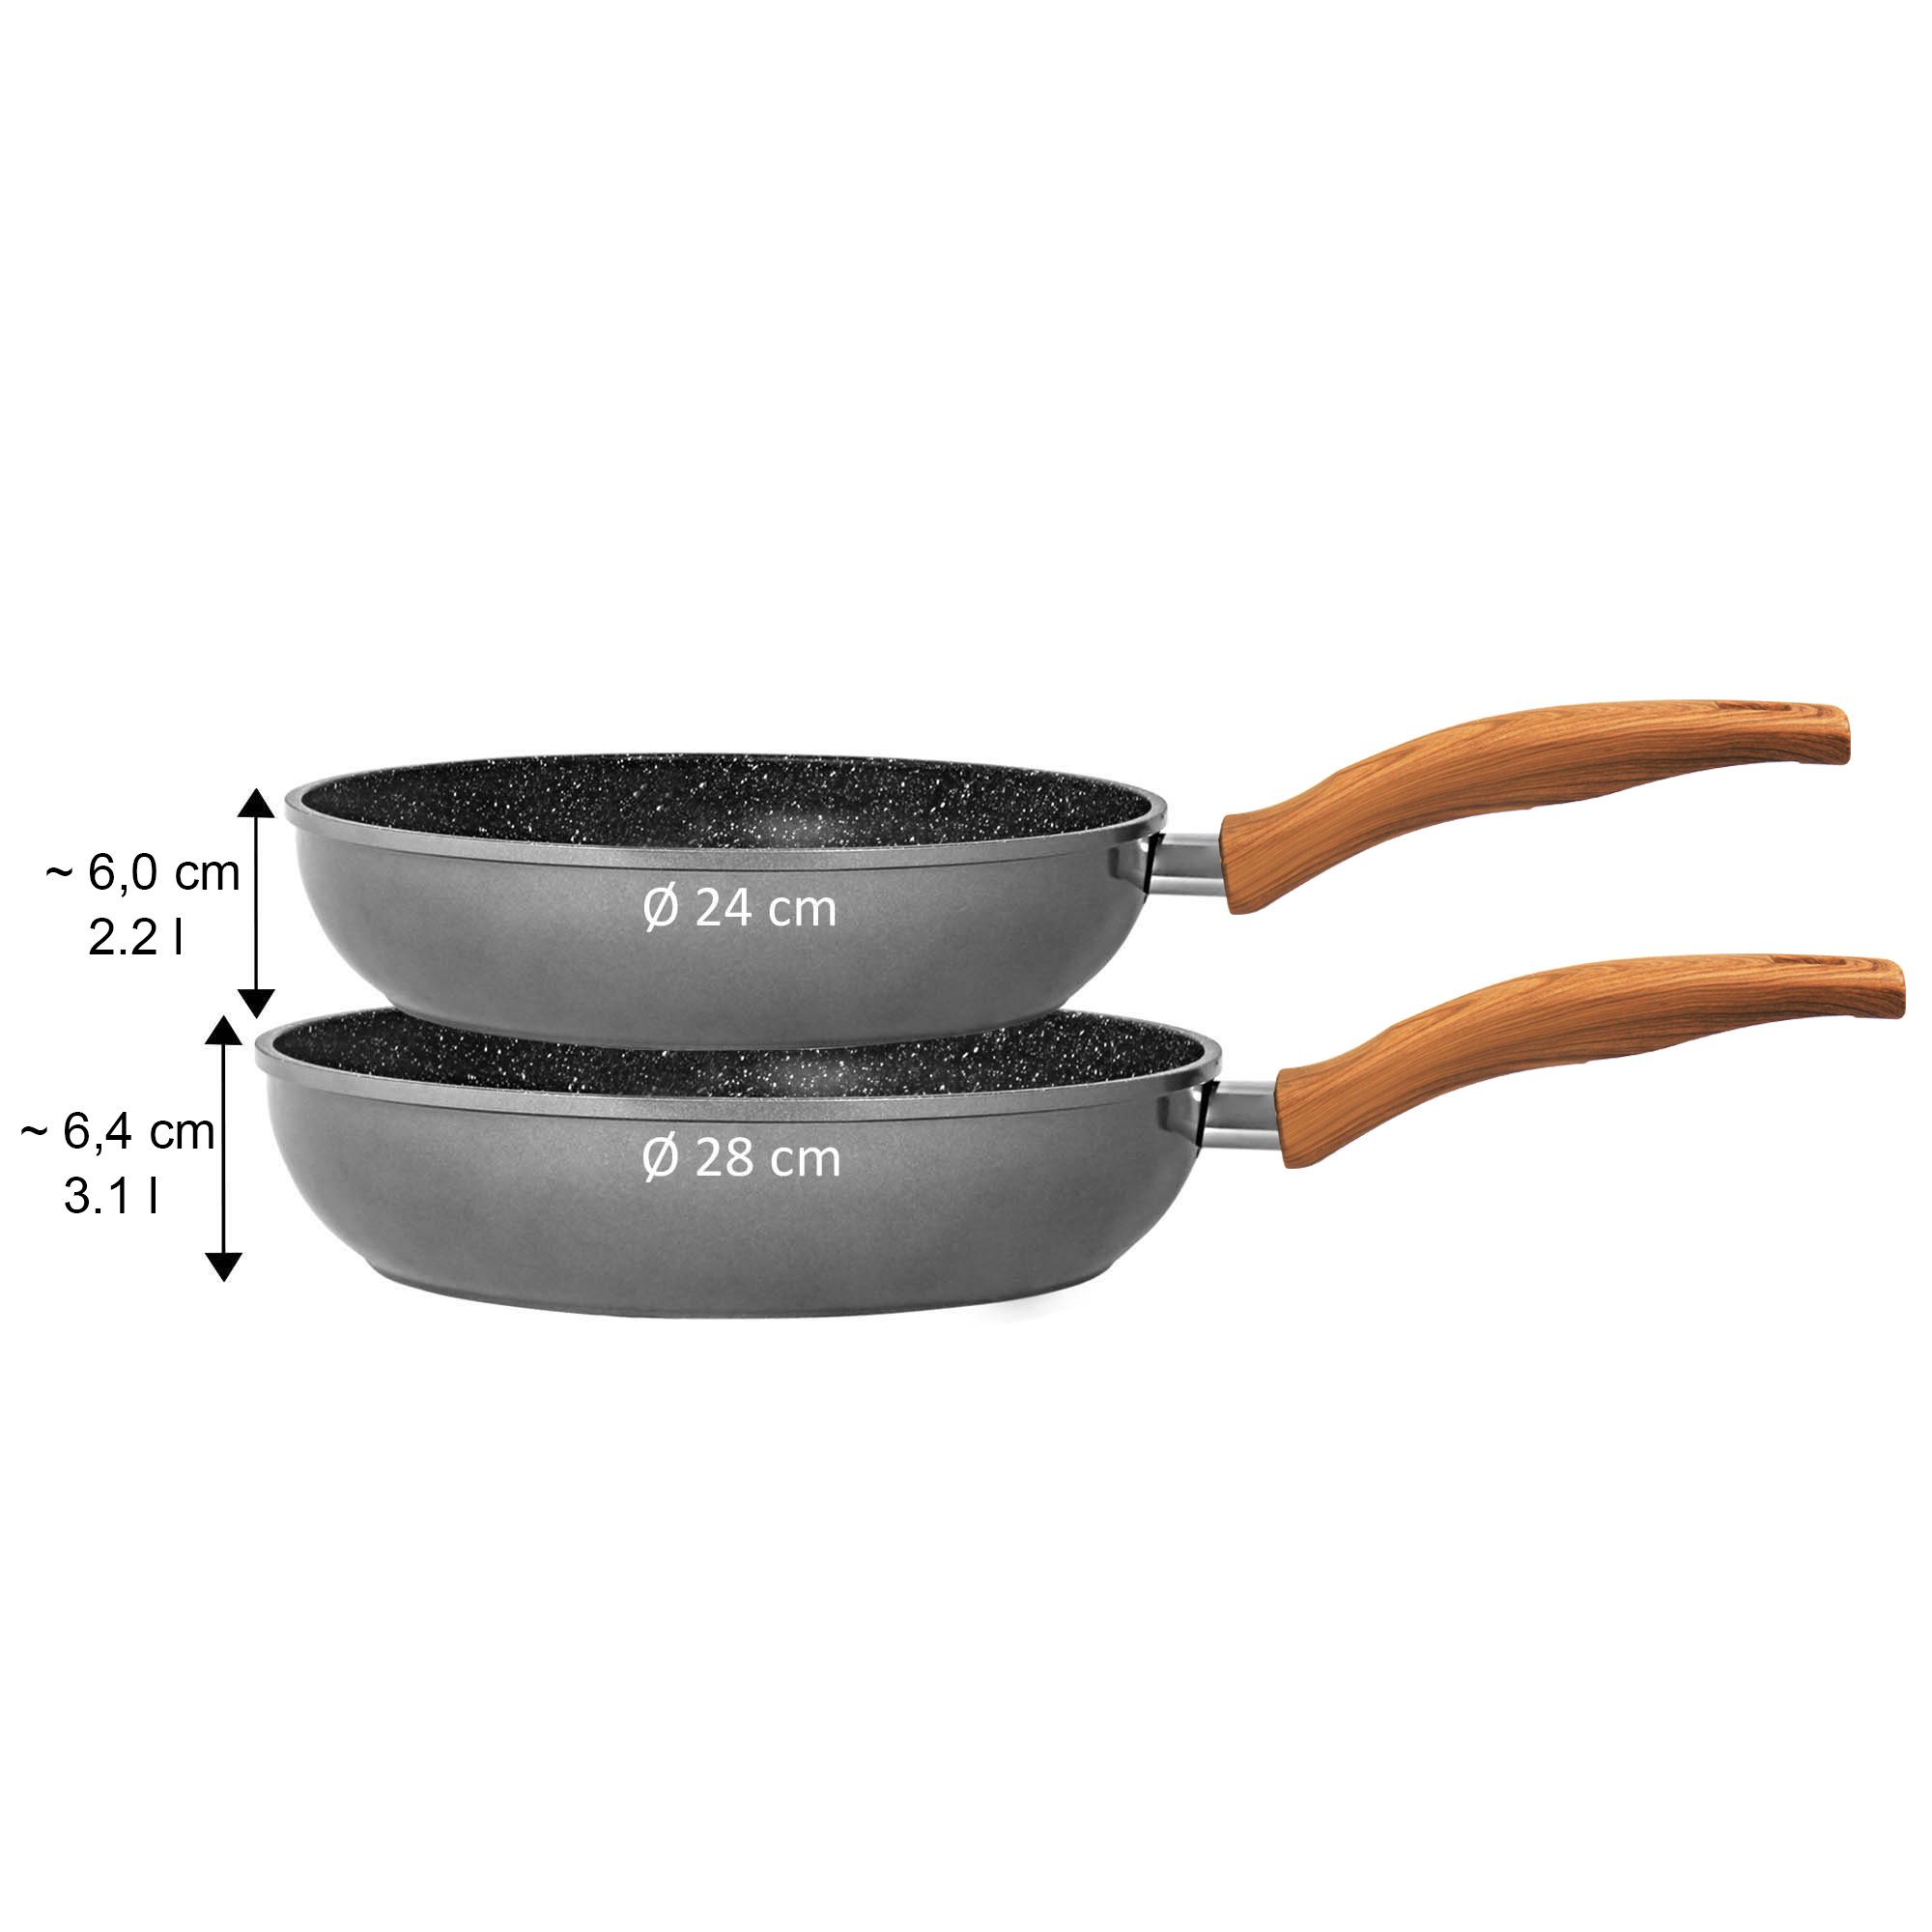 STONELINE® Deep Frying Pan 28 cm, Large Non-Stick Pan | Made in Germany | Back to Nature